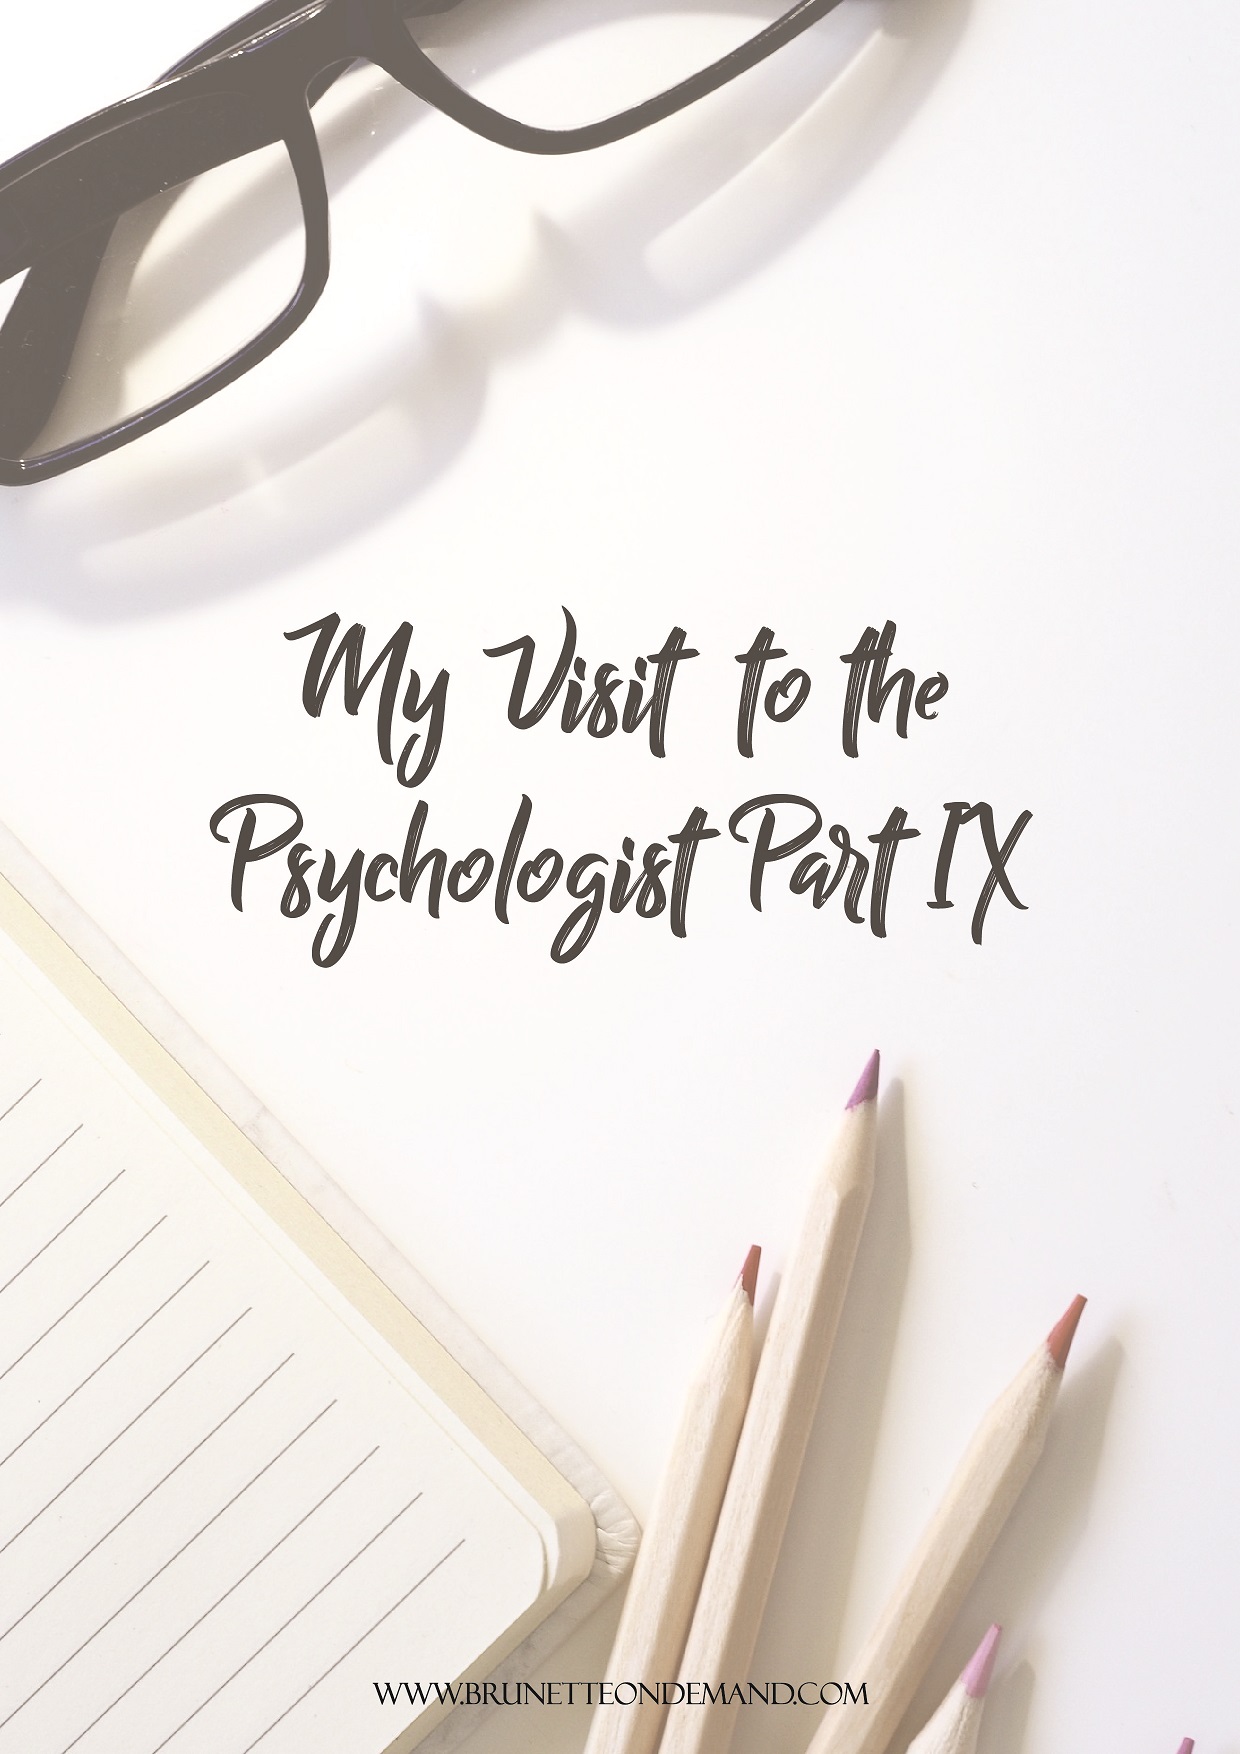 My Visit To The Psychologist Part 9